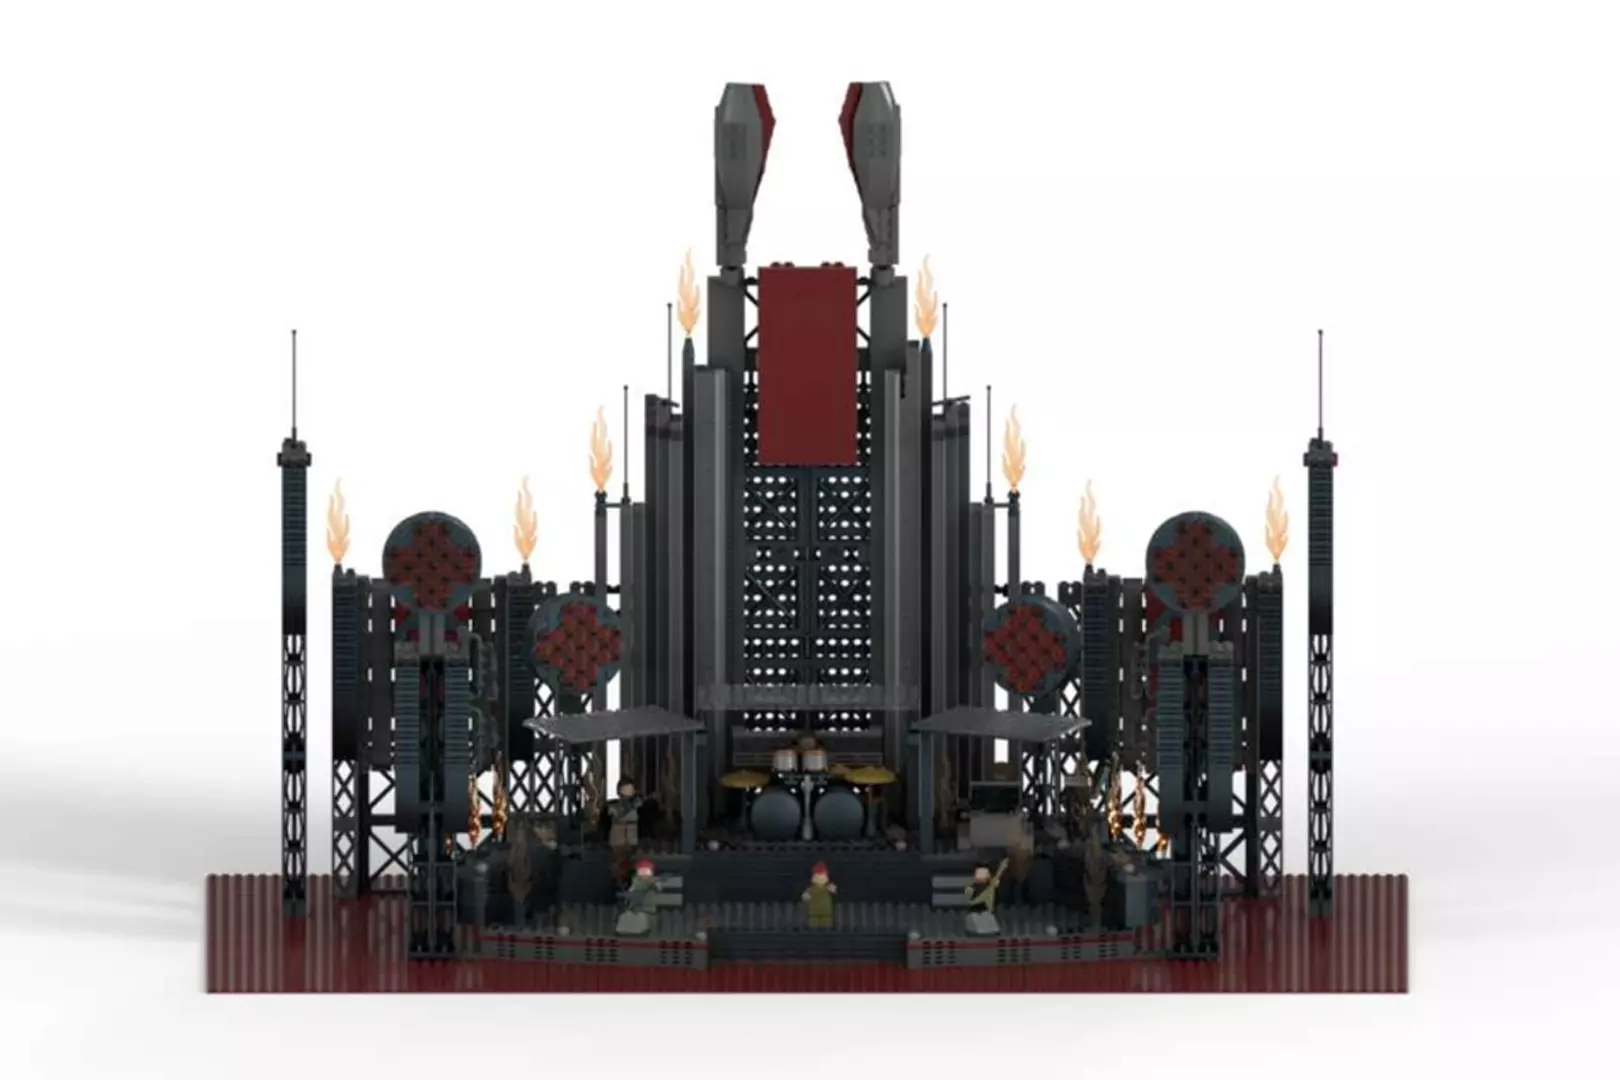 Rammstein's Massive Stage Won't Become a Lego Set